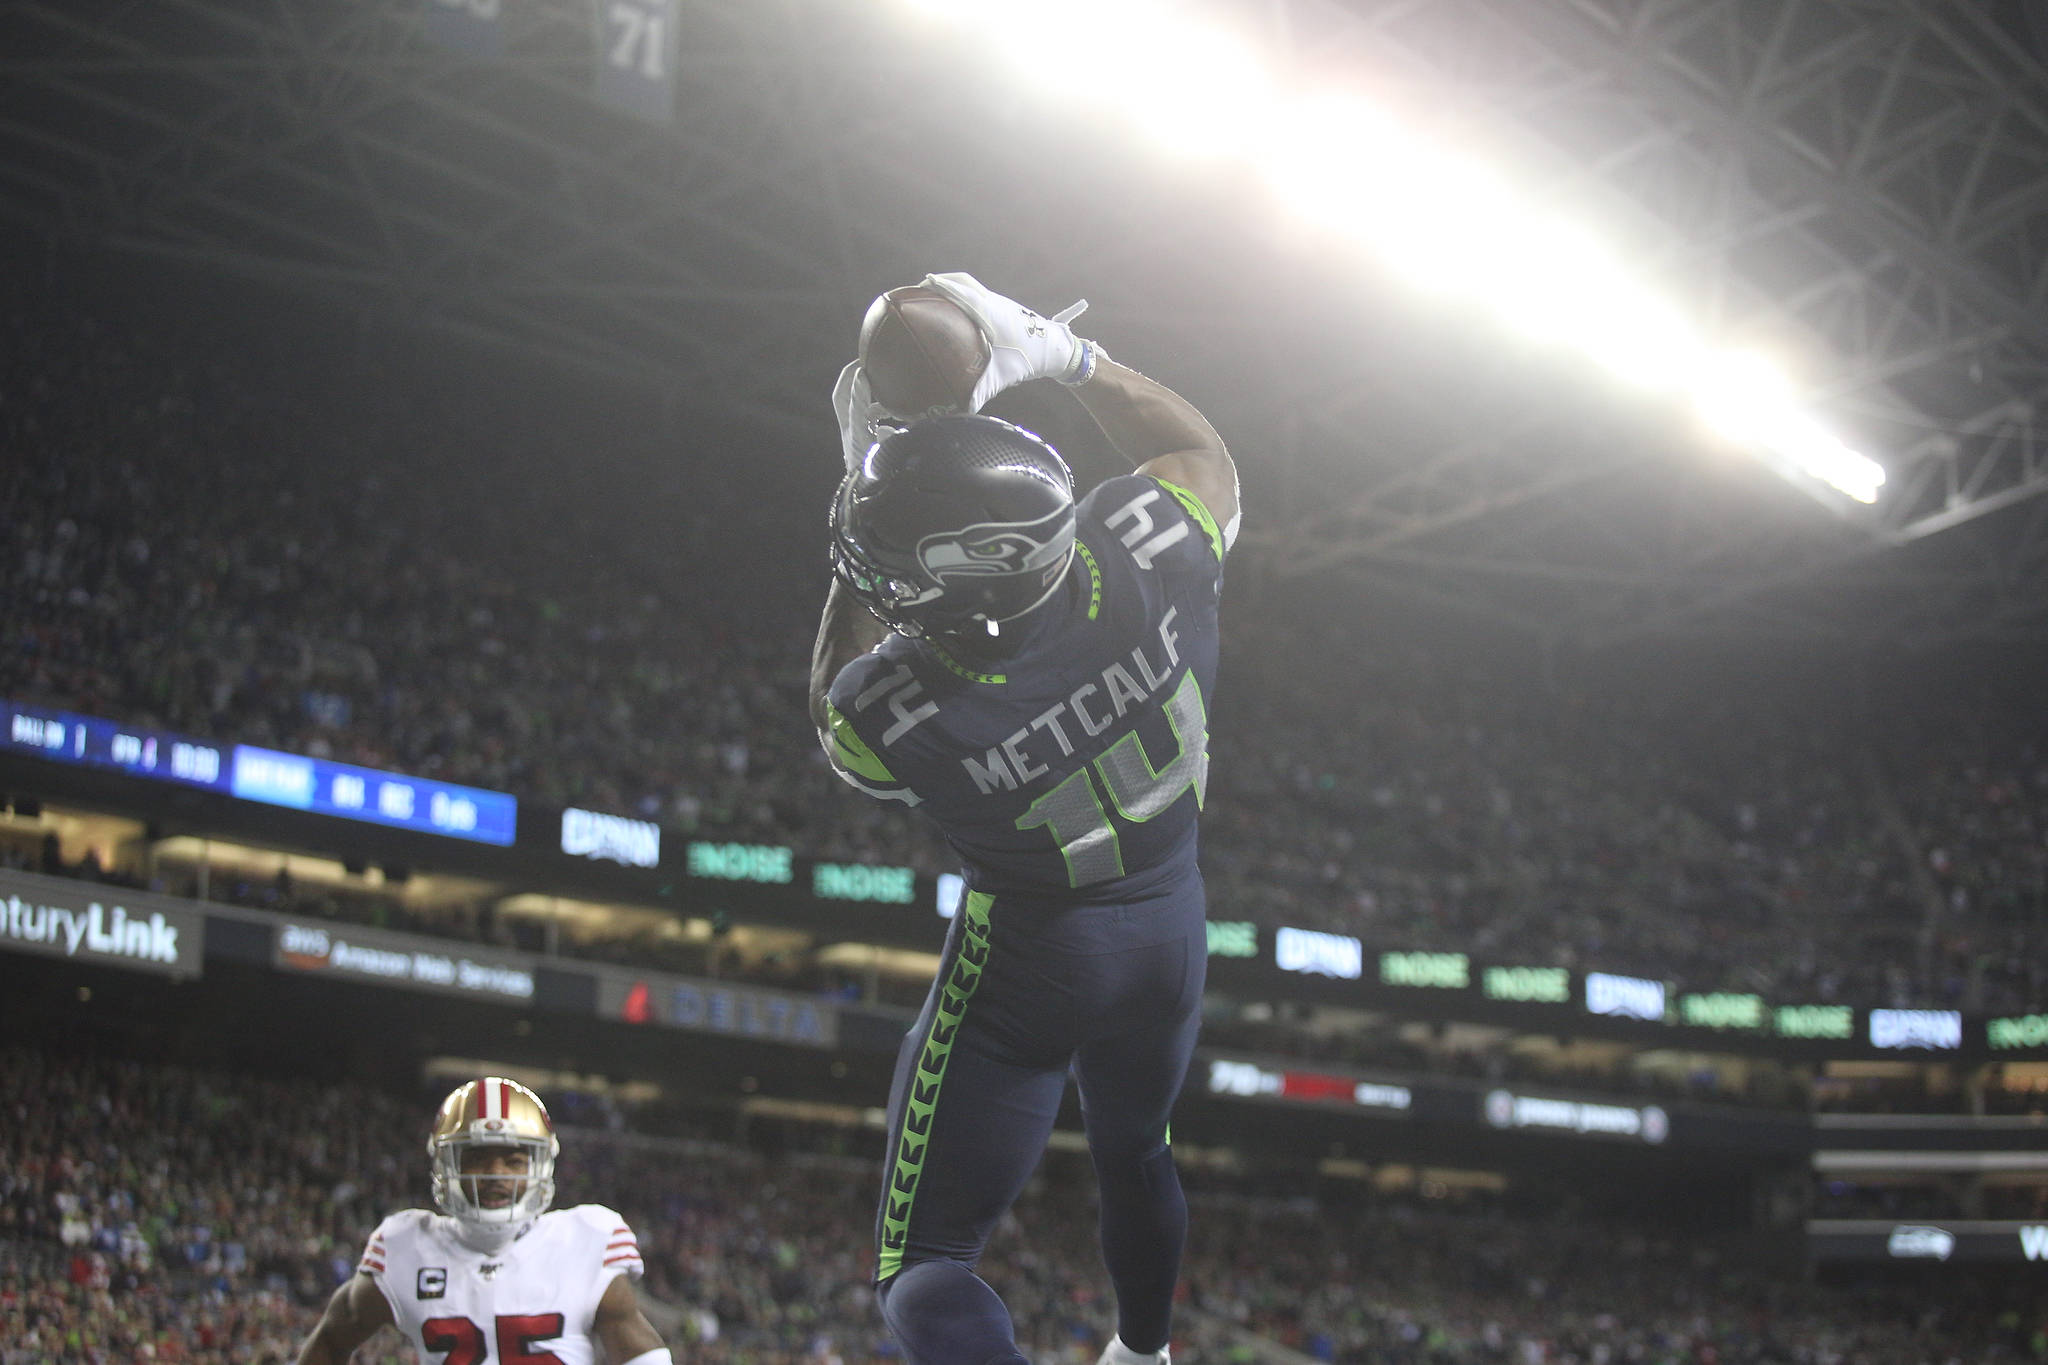 Seattle Seahawks DK Metcalf tries to hauls in a pass but drops it as the Seahawks lost to the San Francisco 49ers 26-21 at CenturyLink Field on Sunday, Dec. 29, 2019 in Seattle, Wash. (Andy Bronson / The Herald)